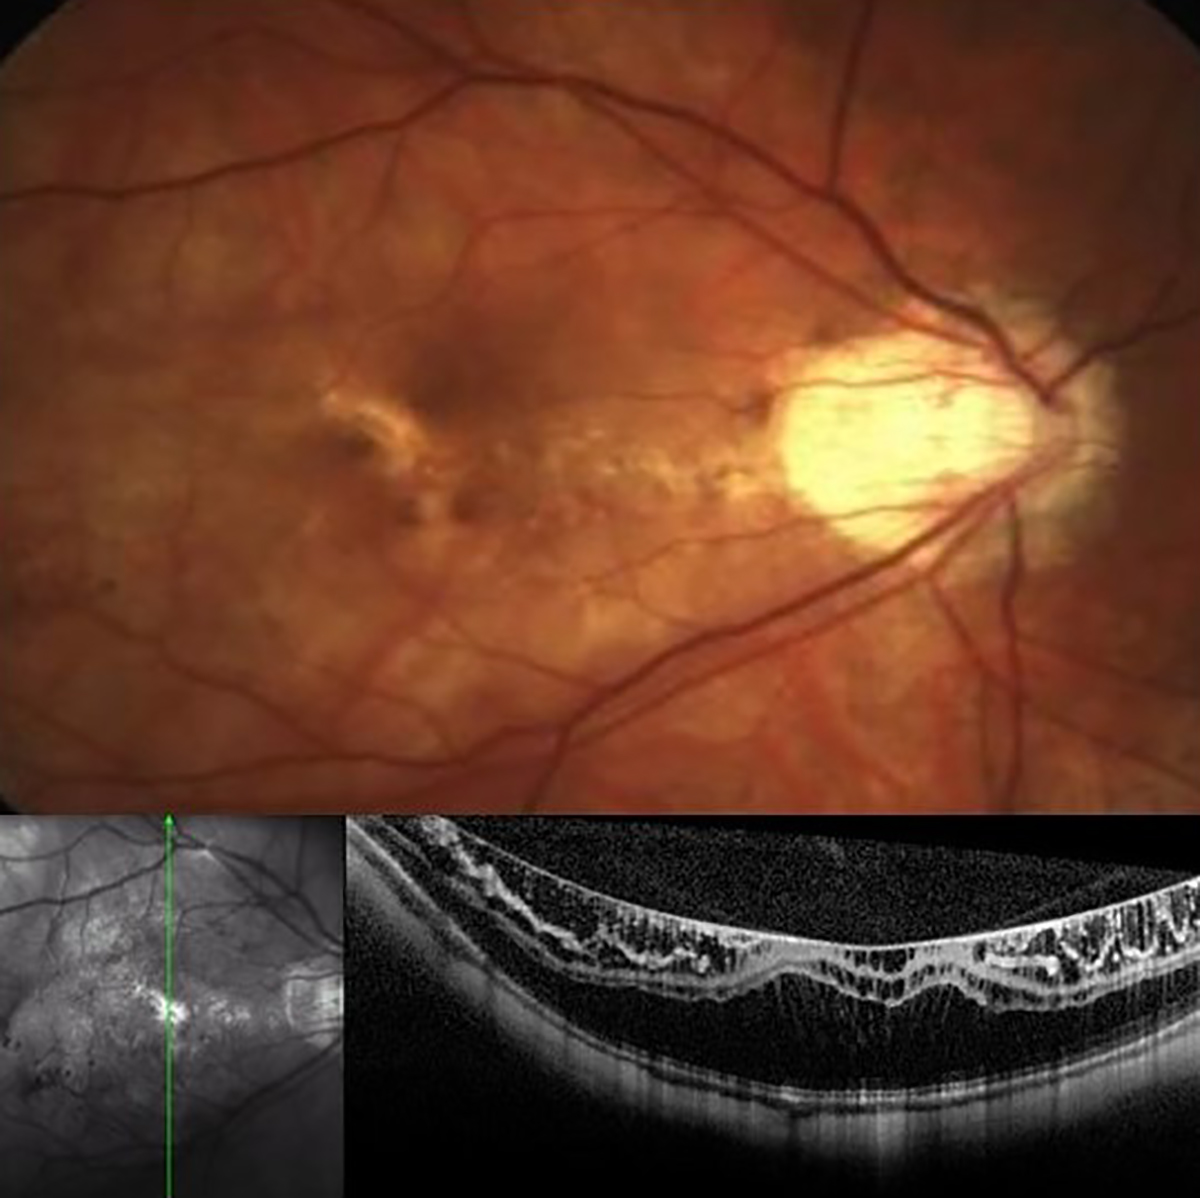 The predominant pattern of advancement manifested in these pediatric myopes as the enlargement of diffuse atrophy, constituting more than half of the reported cases.